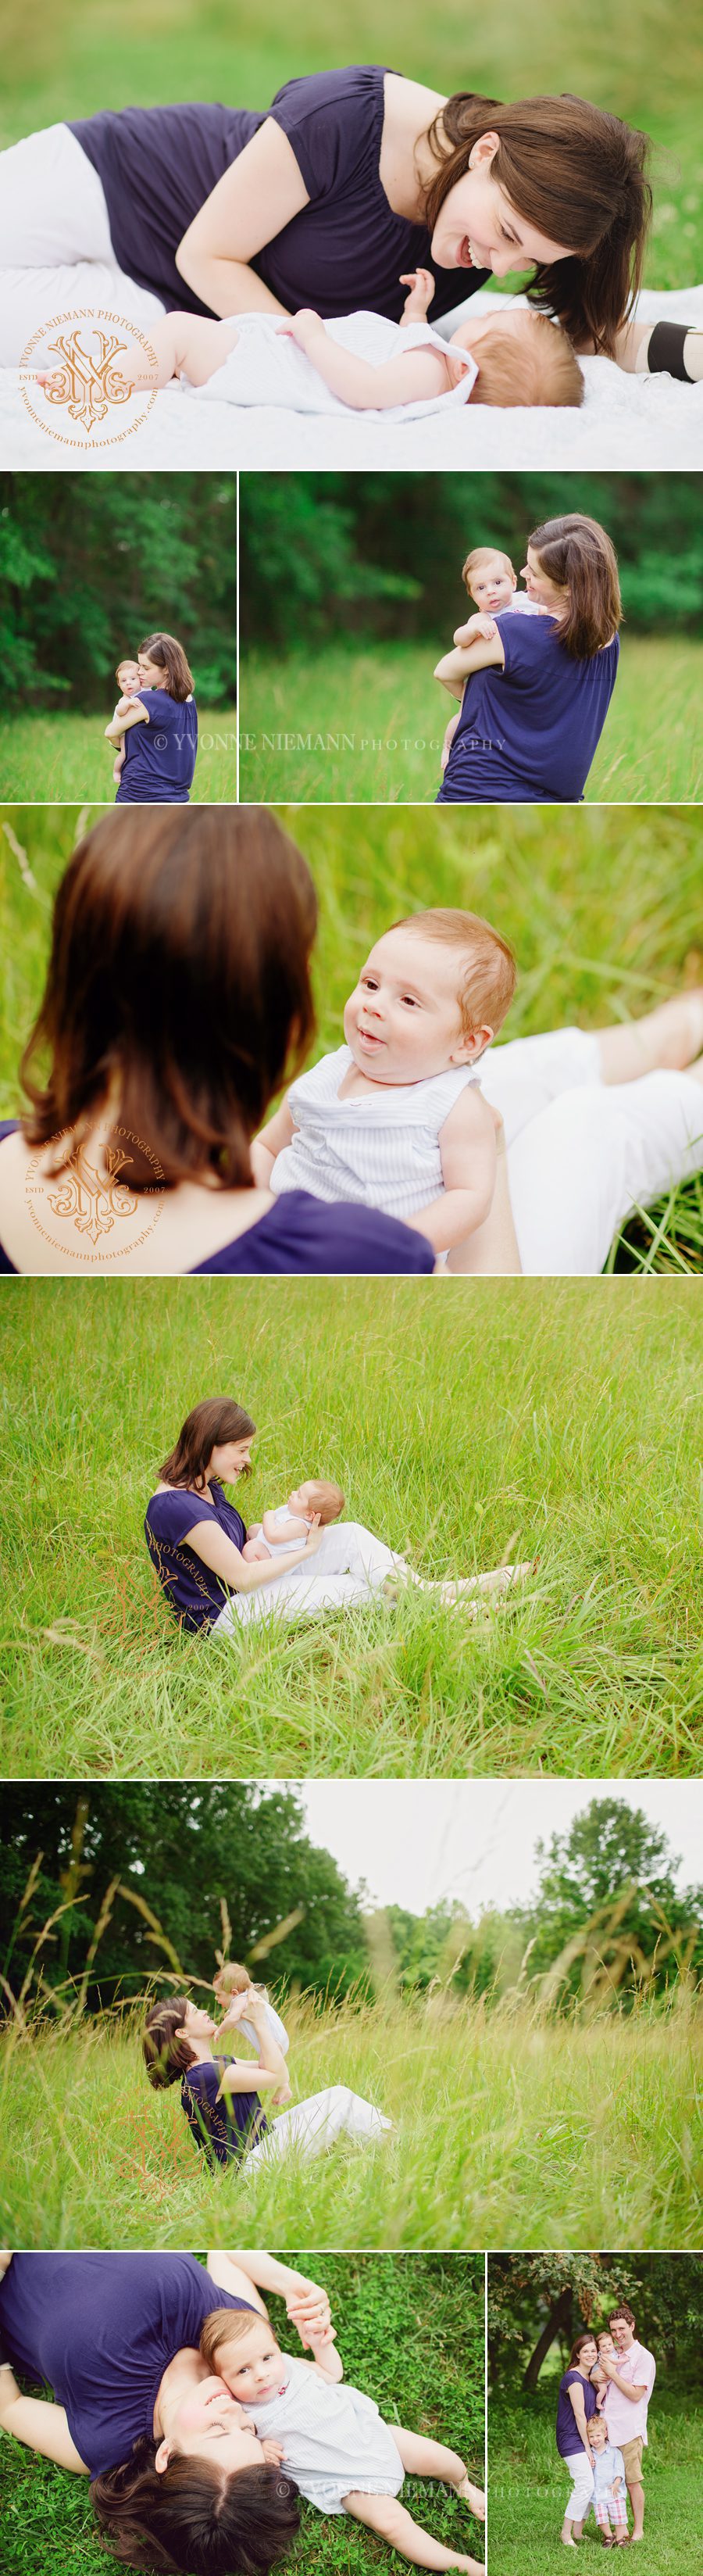 Beautiful mother son images of a baby with his mom in Ballwin by Yvonne Niemann Photography on location.